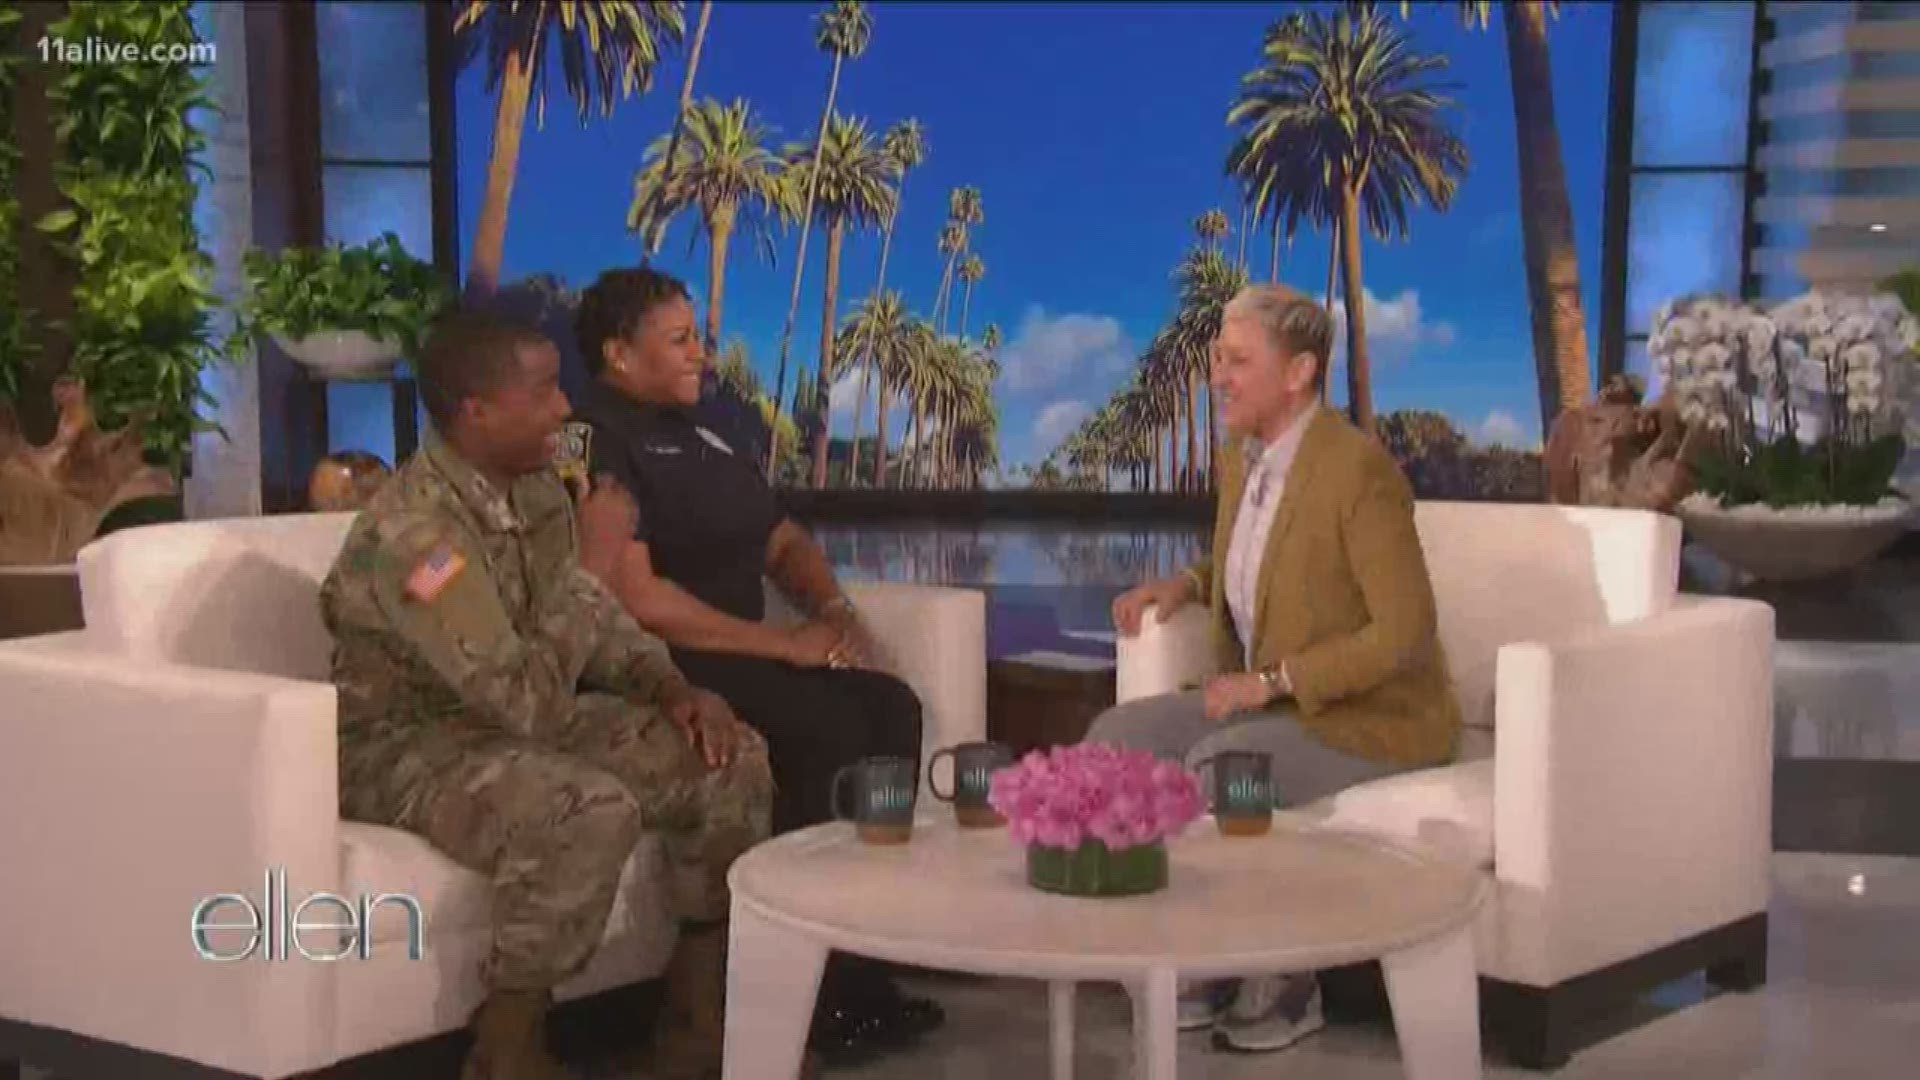 Here's what the mom and son were surprised with on Ellen.